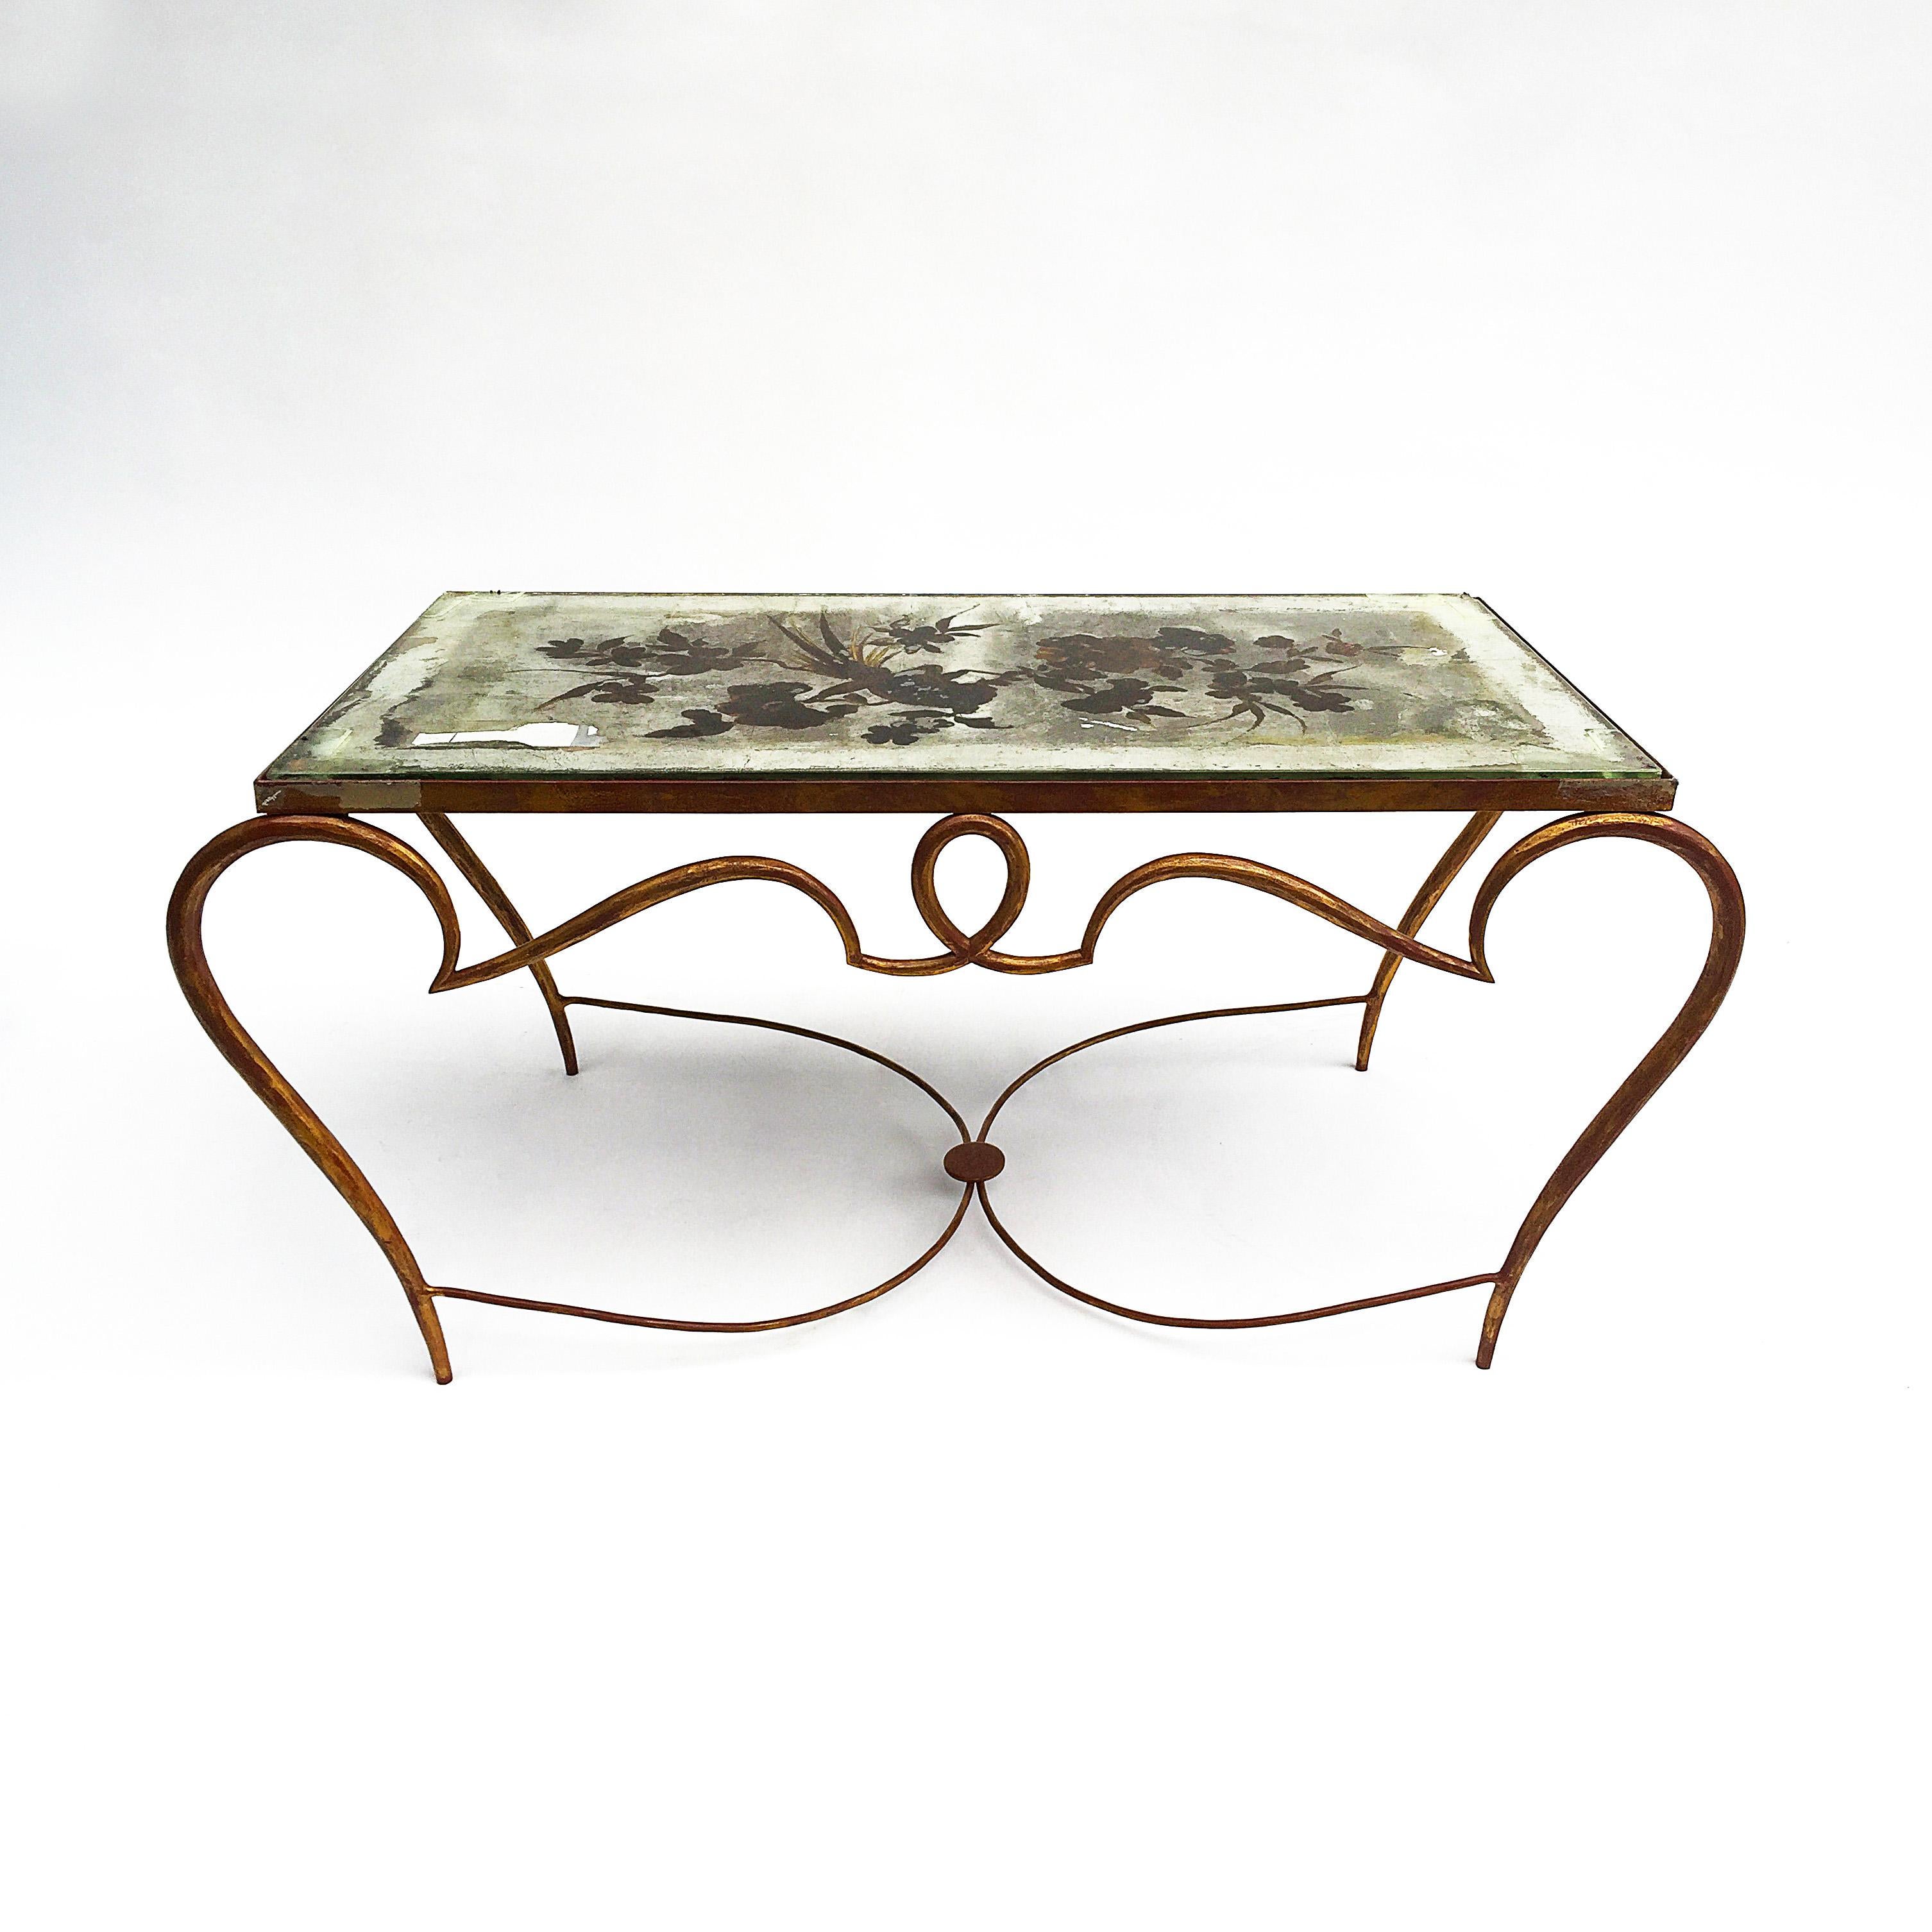 An amazing and historical piece of cocktail table by Rene Drouet that have been documented in several publications.
This French gilt cocktail coffee table by Rene Drouet surprisingly still owns its original églomisé mirrored top created by Pierre